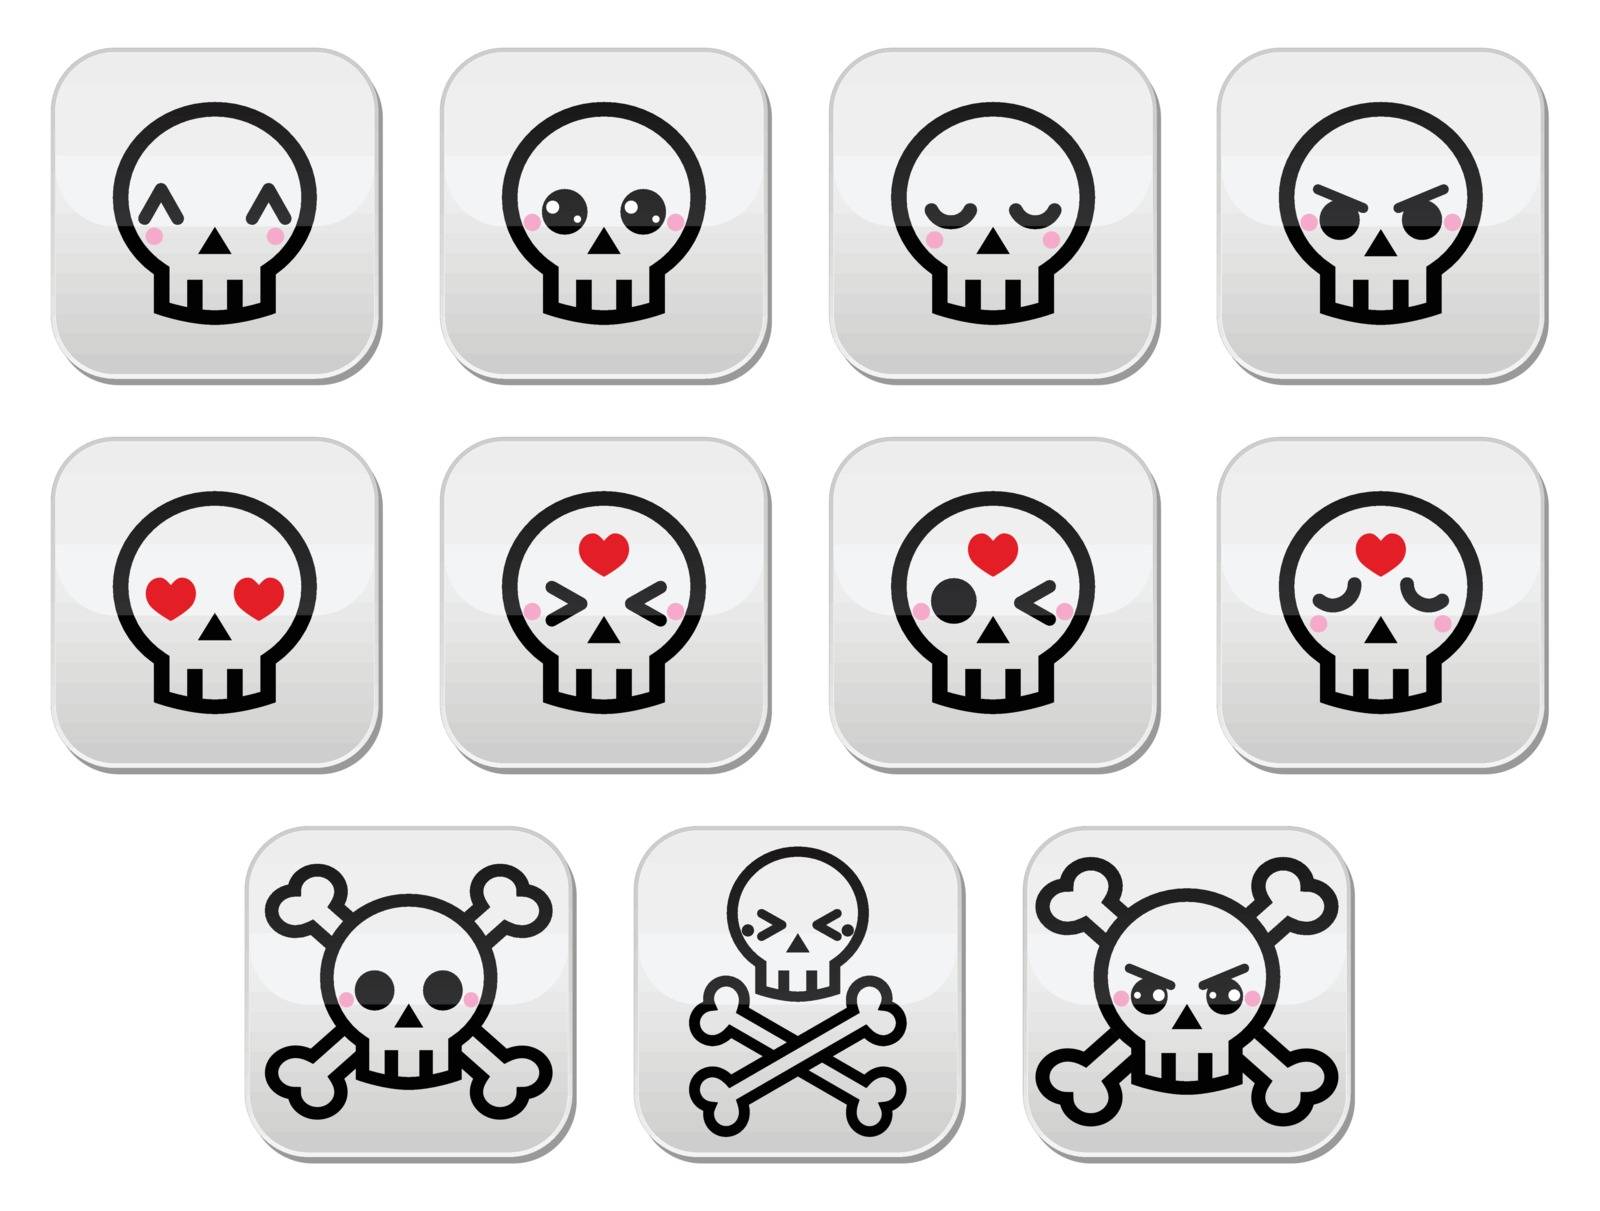 Cute kawaii characters - skulls with different expressions isolated on white